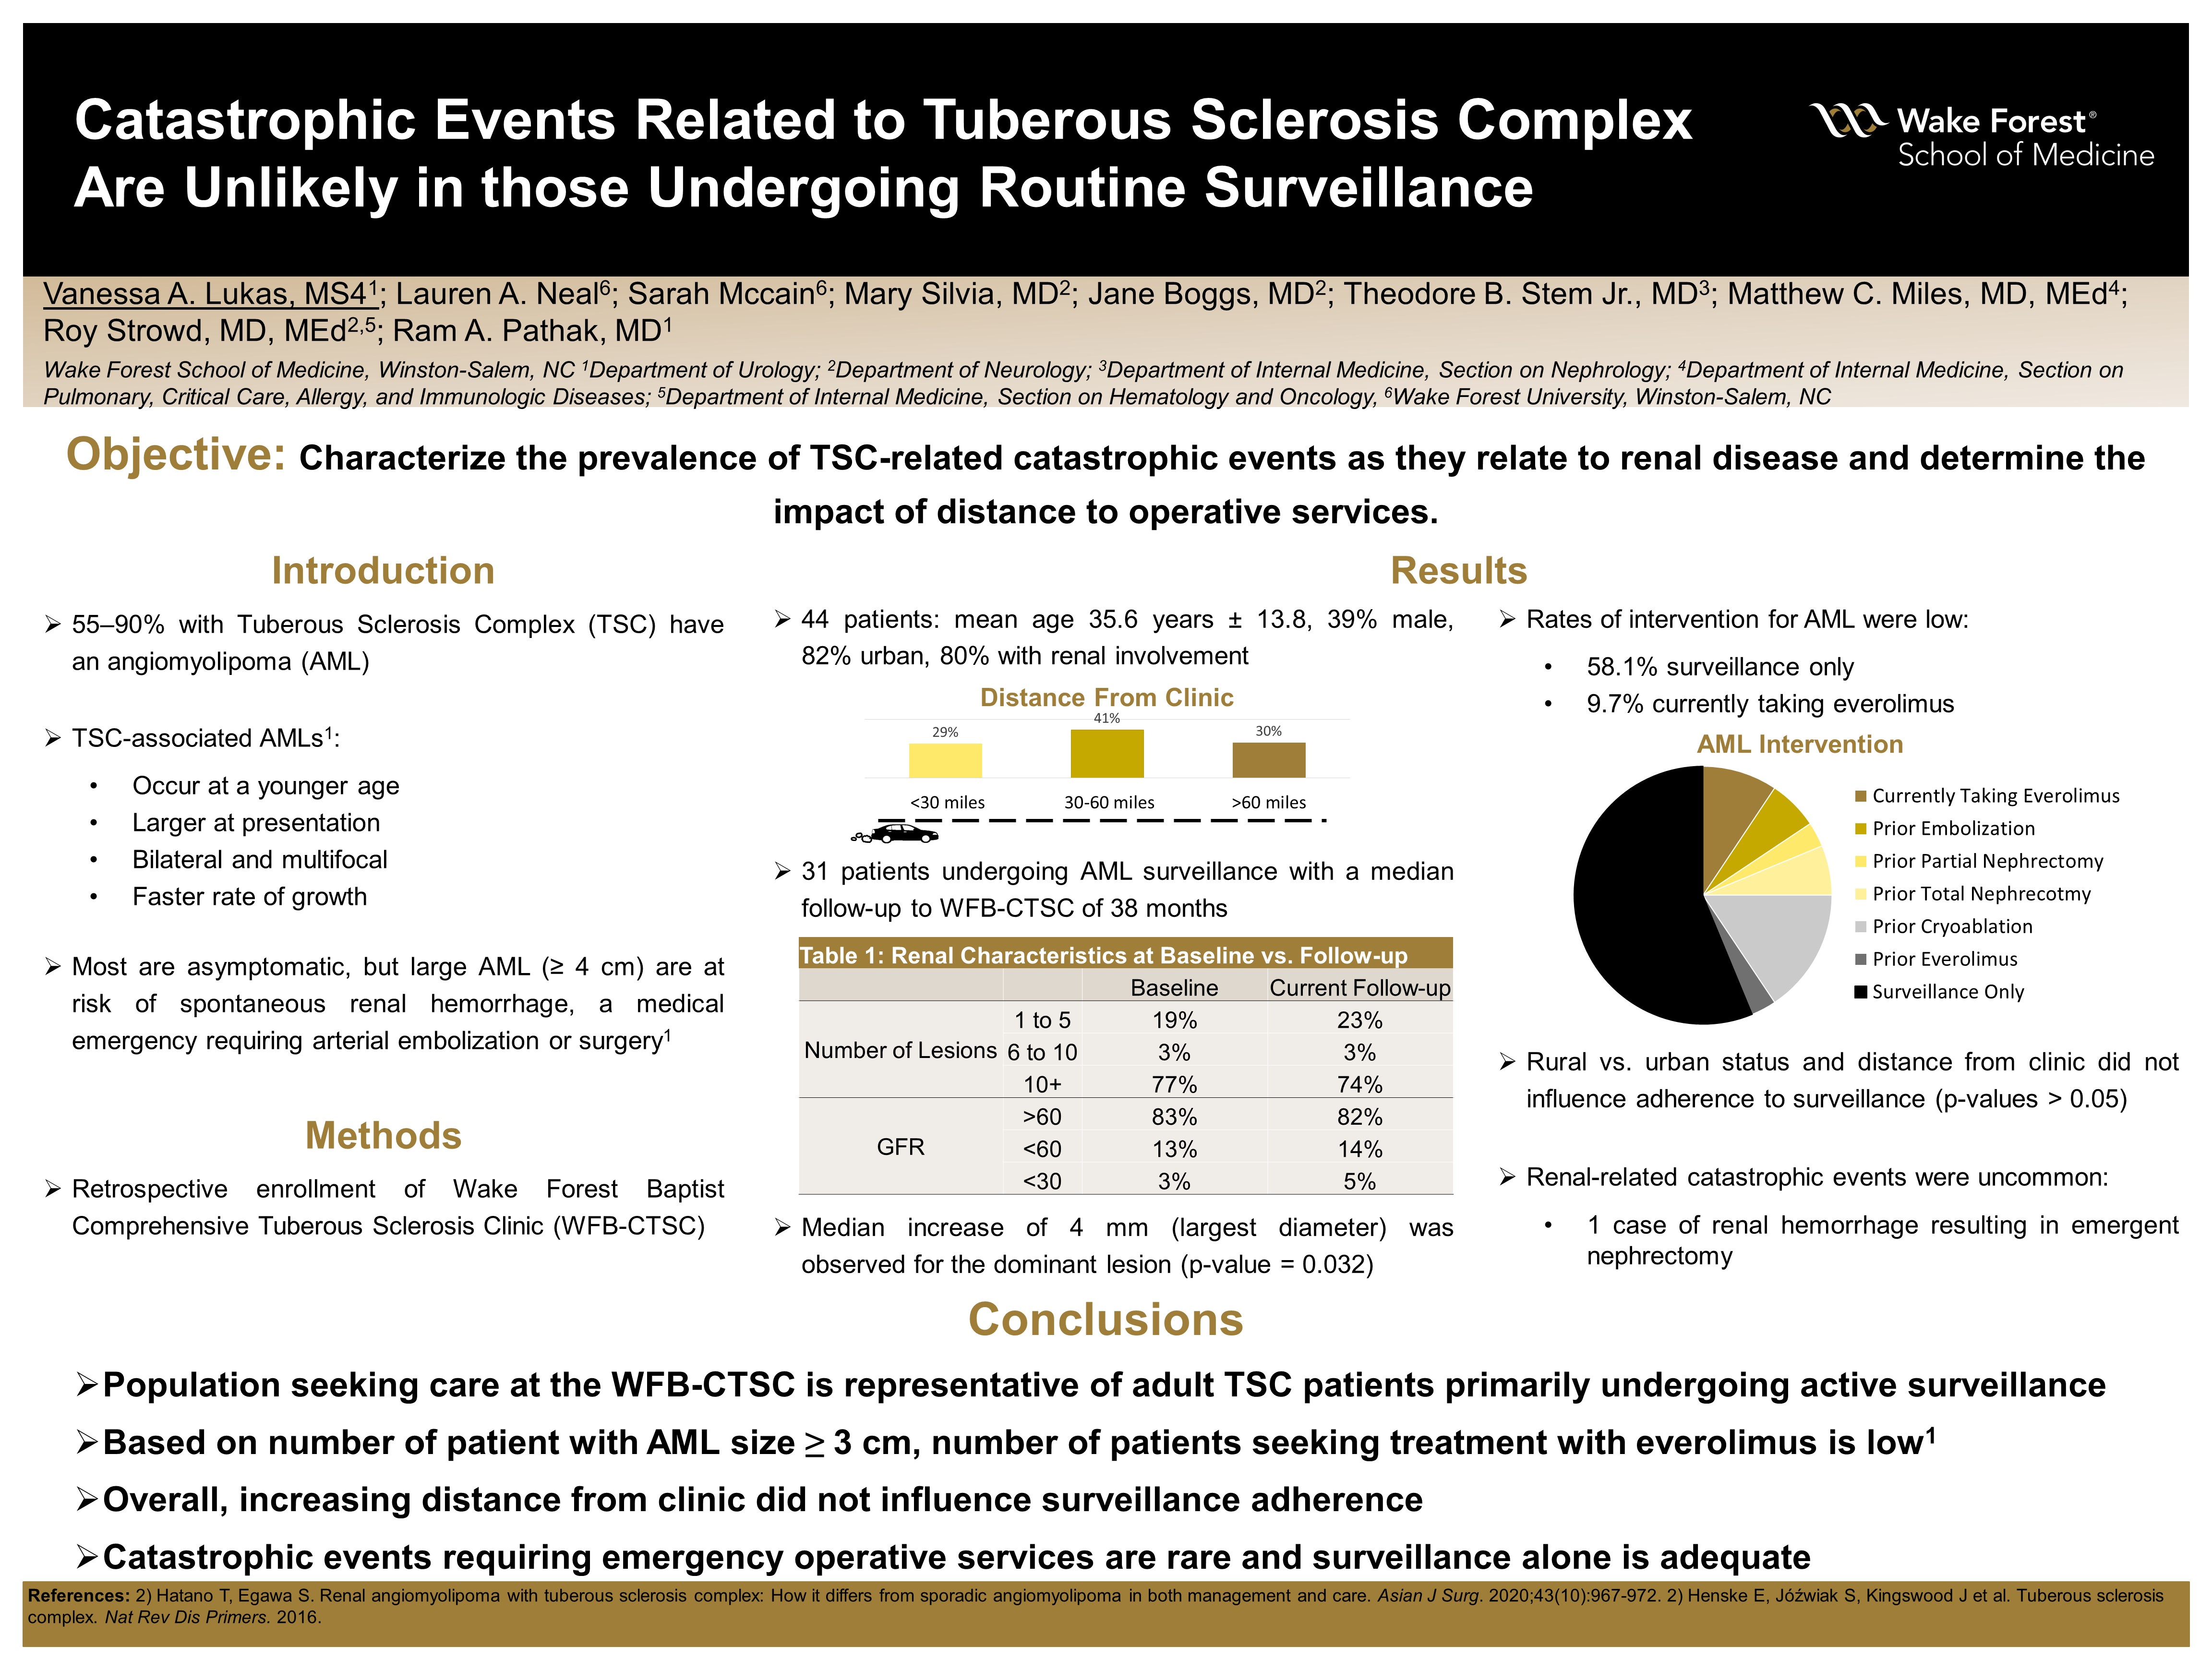 Showcase Image for Catastrophic Events Related to Tuberous Sclerosis Complex Are Unlikely in those Undergoing Routine Surveillance